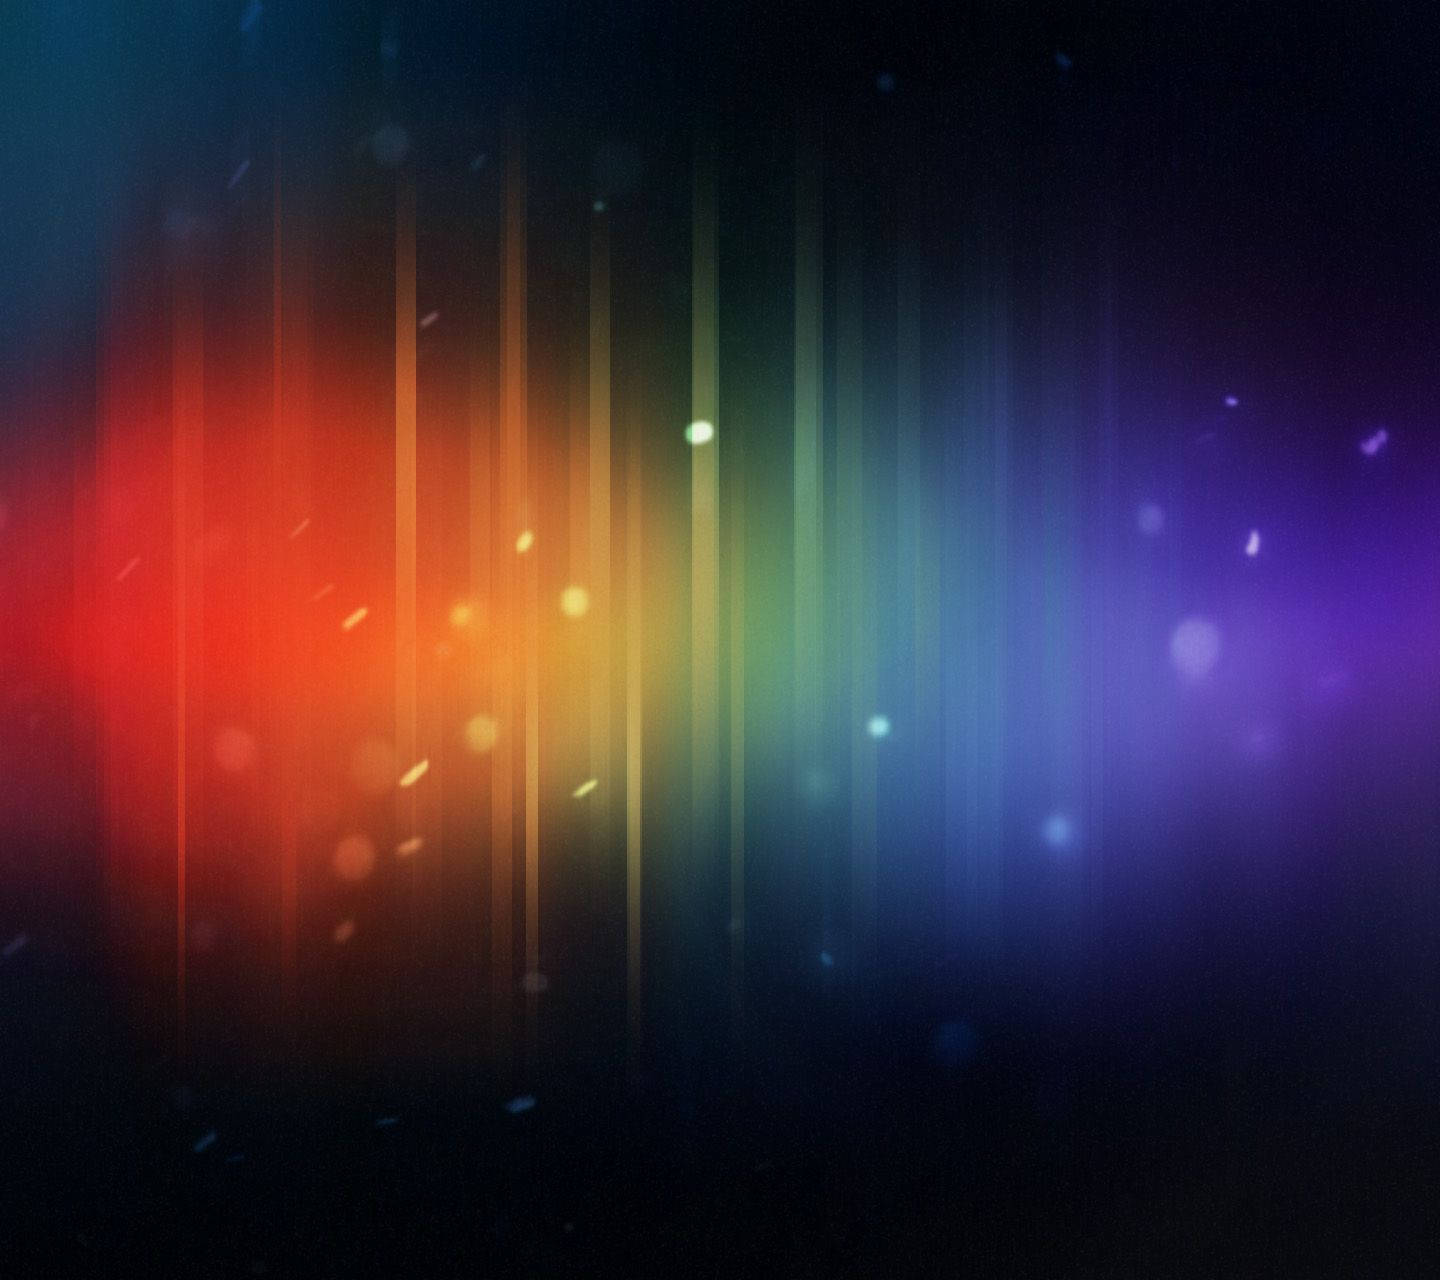 Rainbow-colored lights Android Jelly Bean wallpaper. 